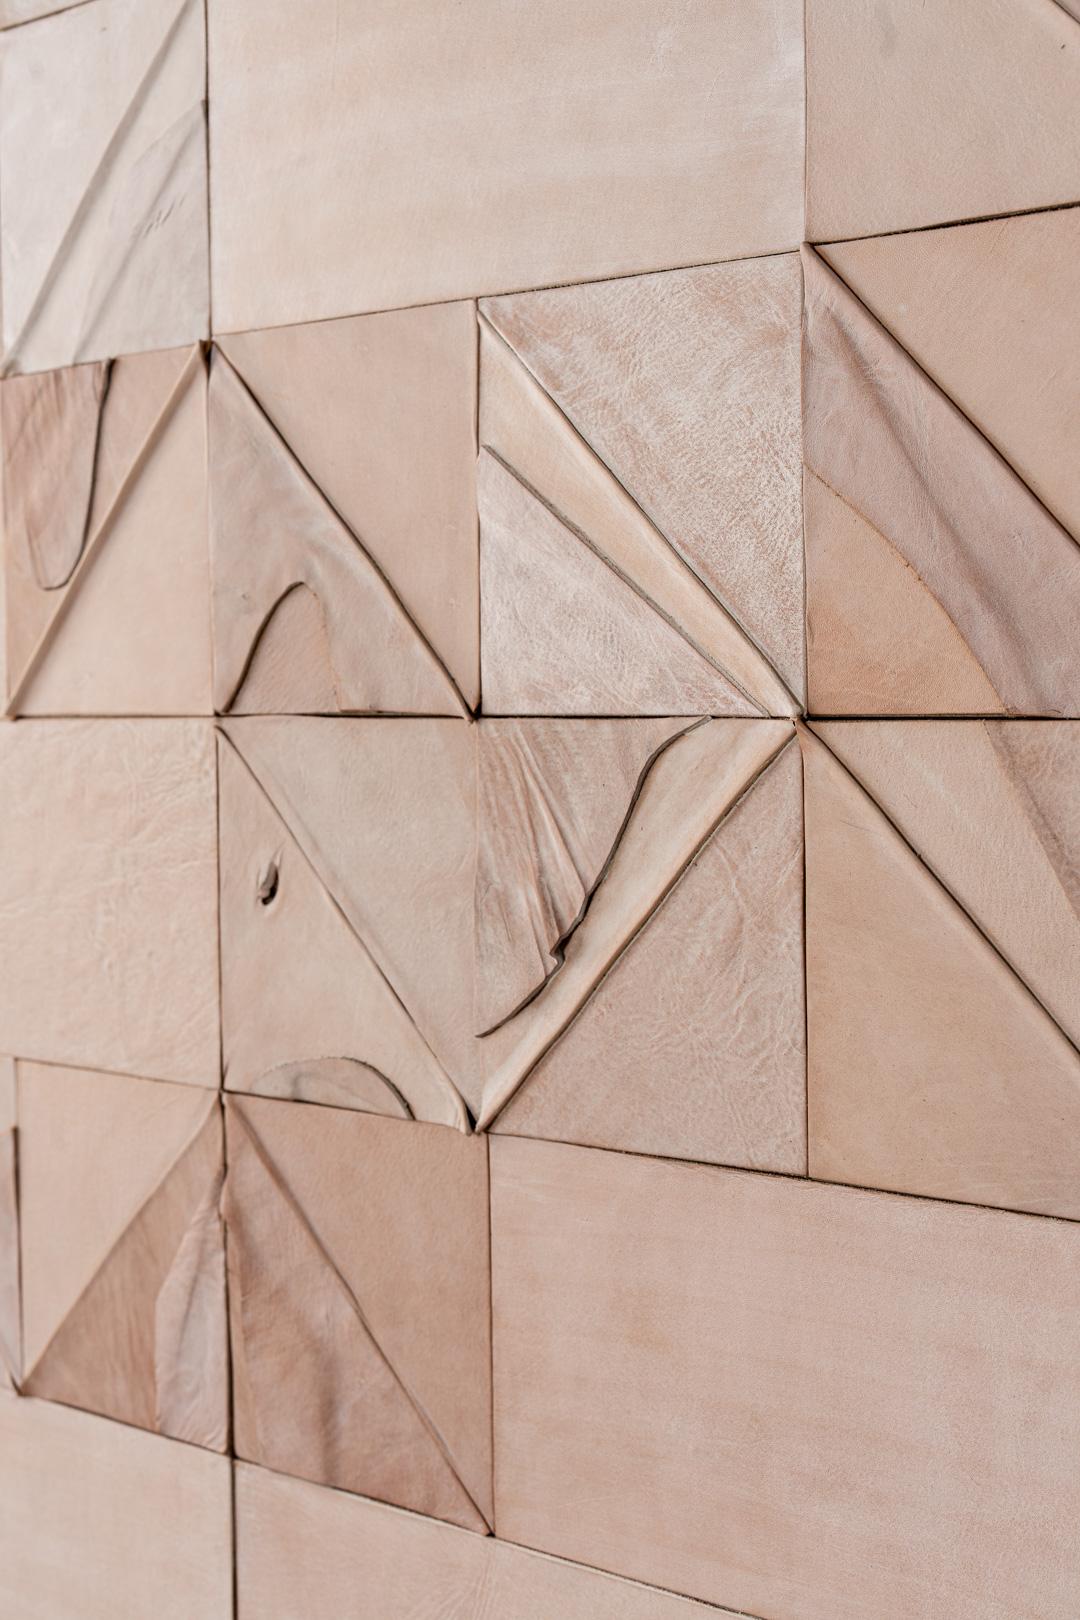 These WHITE WASH LEATHER collage tiles are made in modular sizes and SOLD BY THE SQUARE FOOT, NOT PER TILE. The tiles can be hung on any wall surface and in any configuration. Each panel is composed randomly and therefore, no two panels are alike.